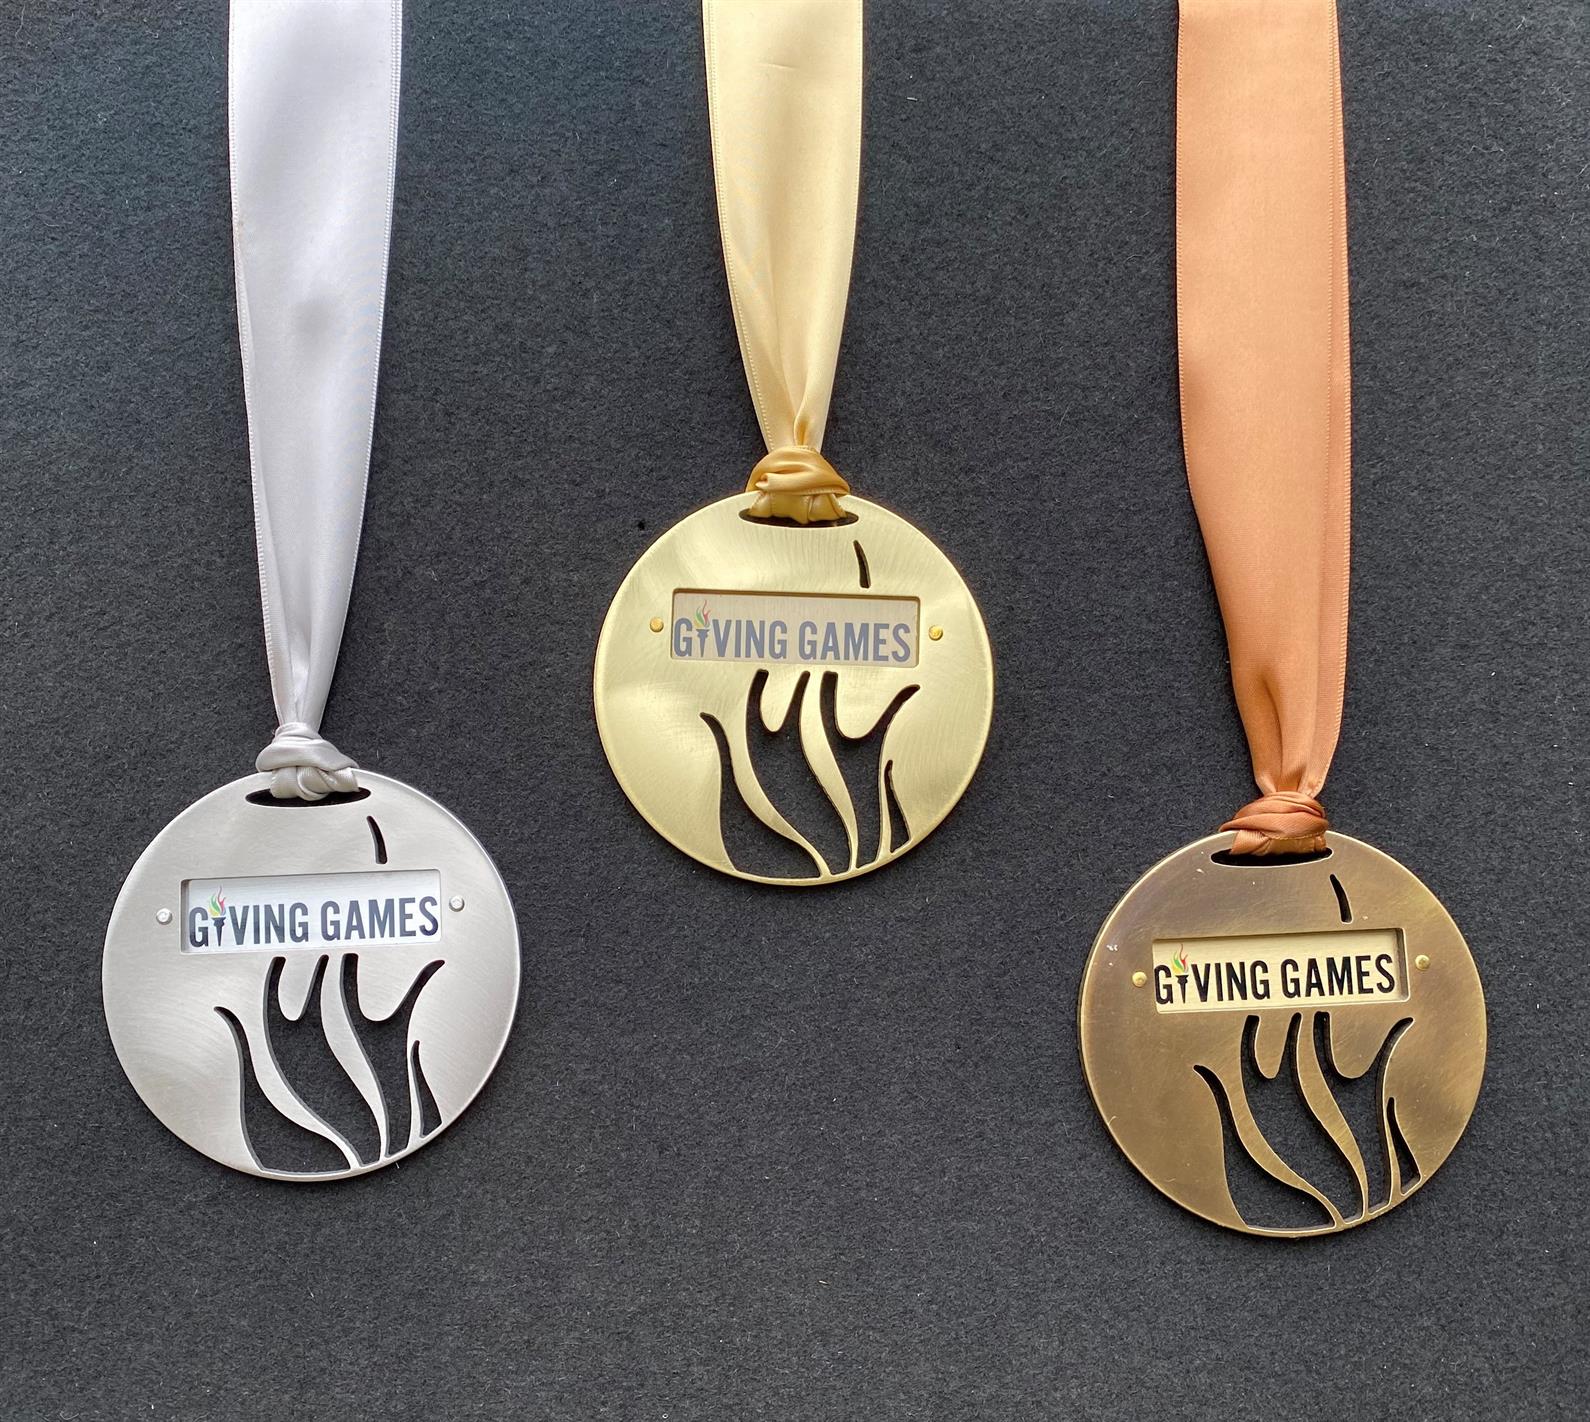 Bronze, silver, and gold Medals of Giving